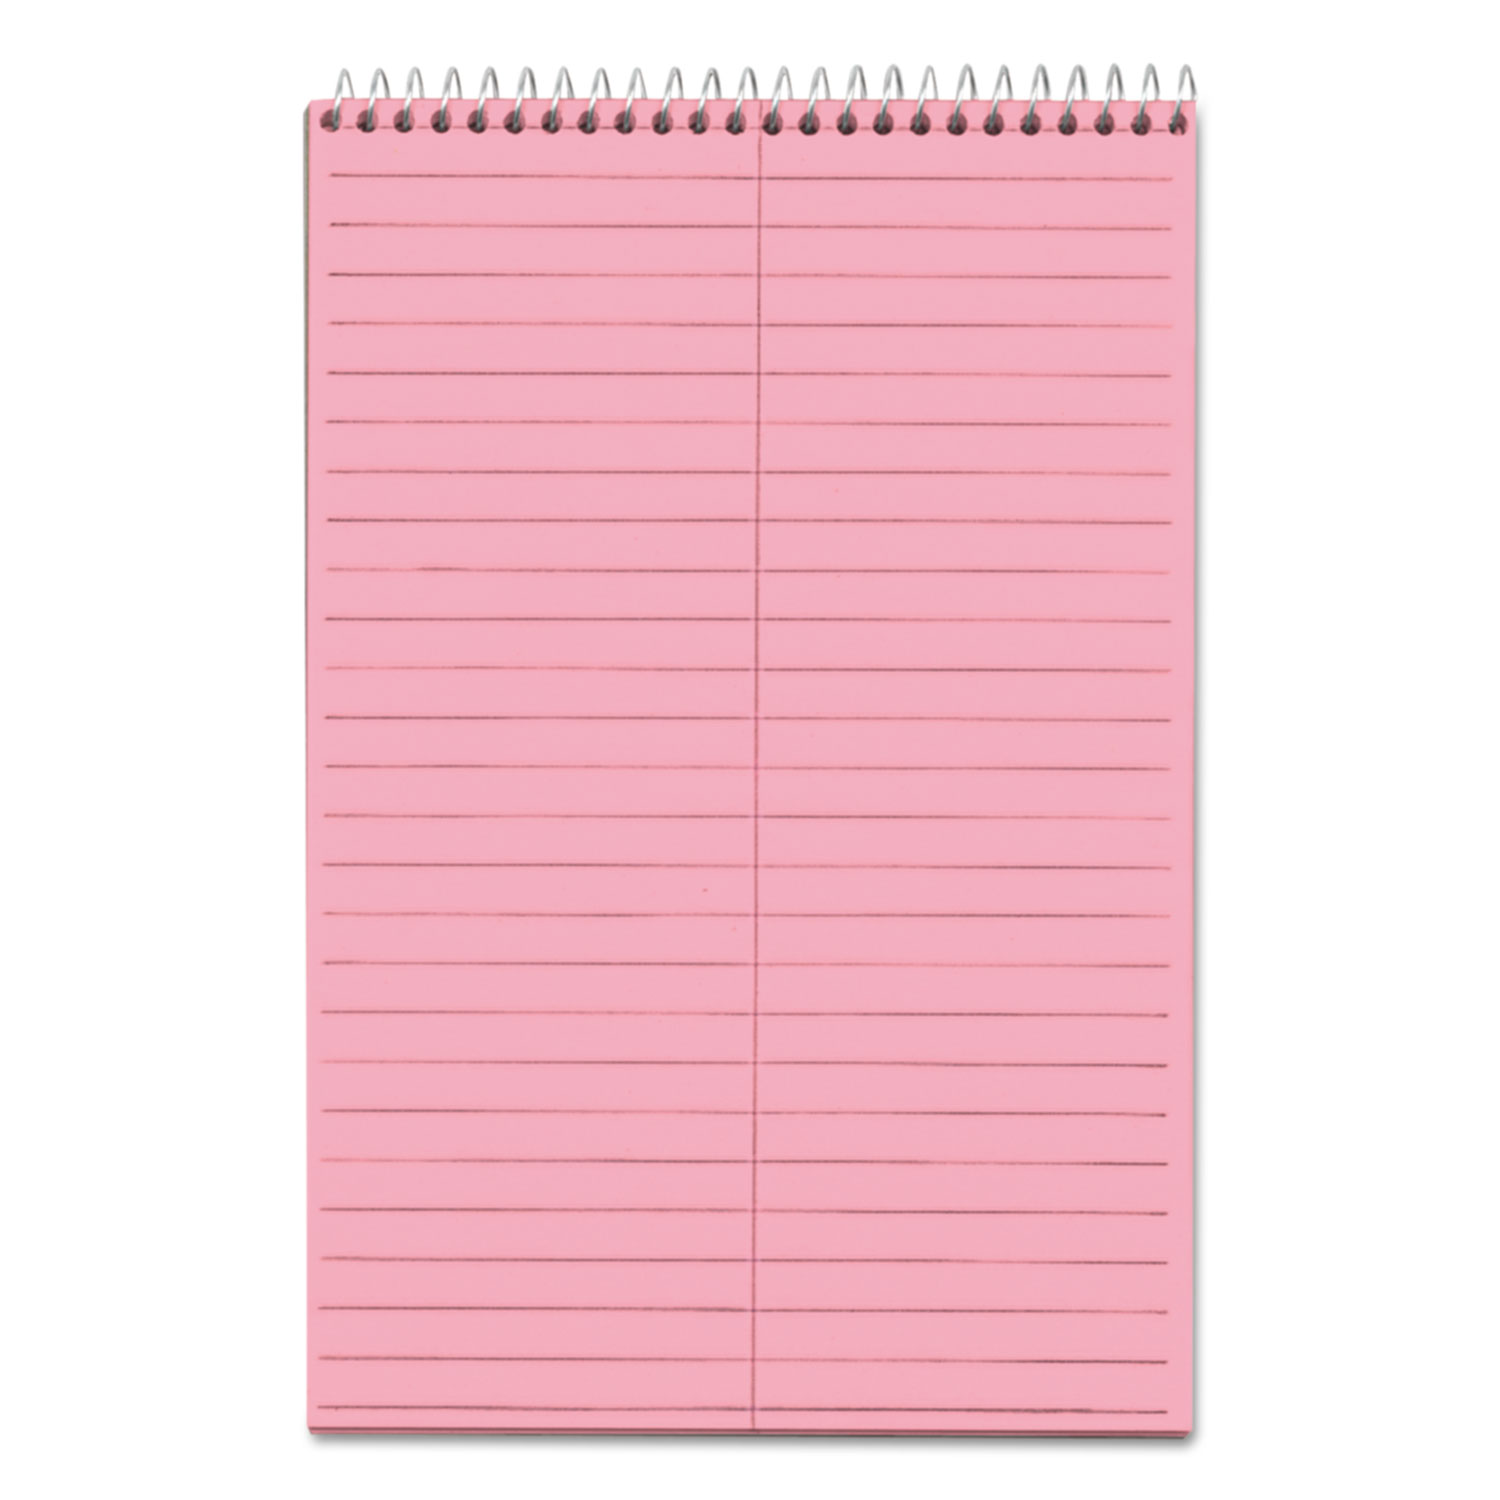  TOPS 80254 Prism Steno Books, Gregg Rule, 6 x 9, Pink, 80 Sheets, 4/Pack (TOP80254) 